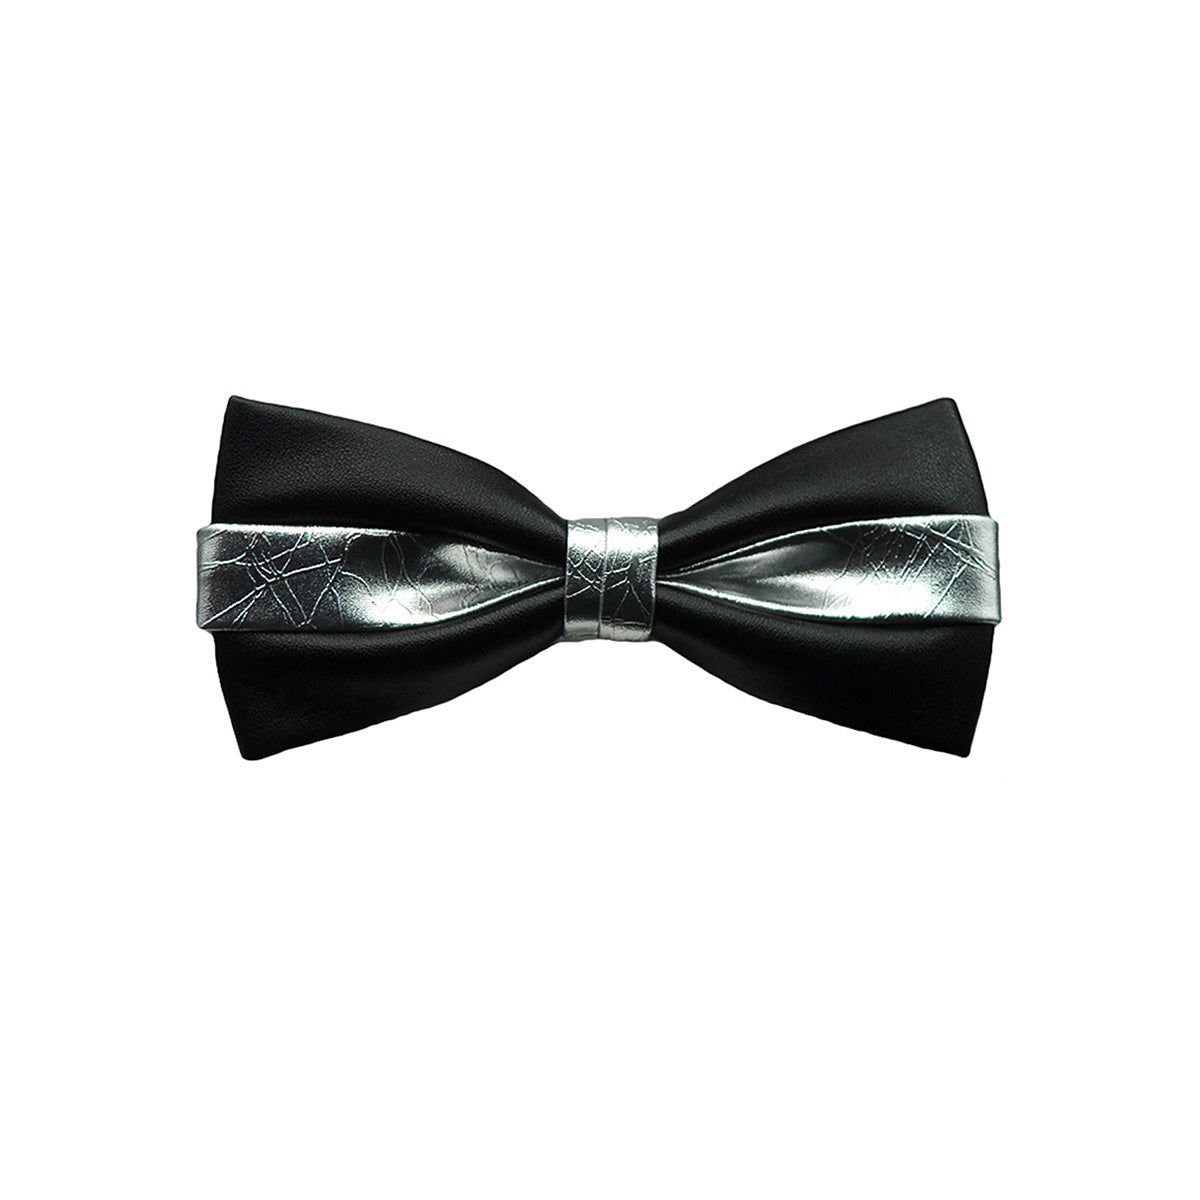 Faux Black Leather Bow Tie with Metallic Accent - Unisex, Bow tie, HEED THE HUM